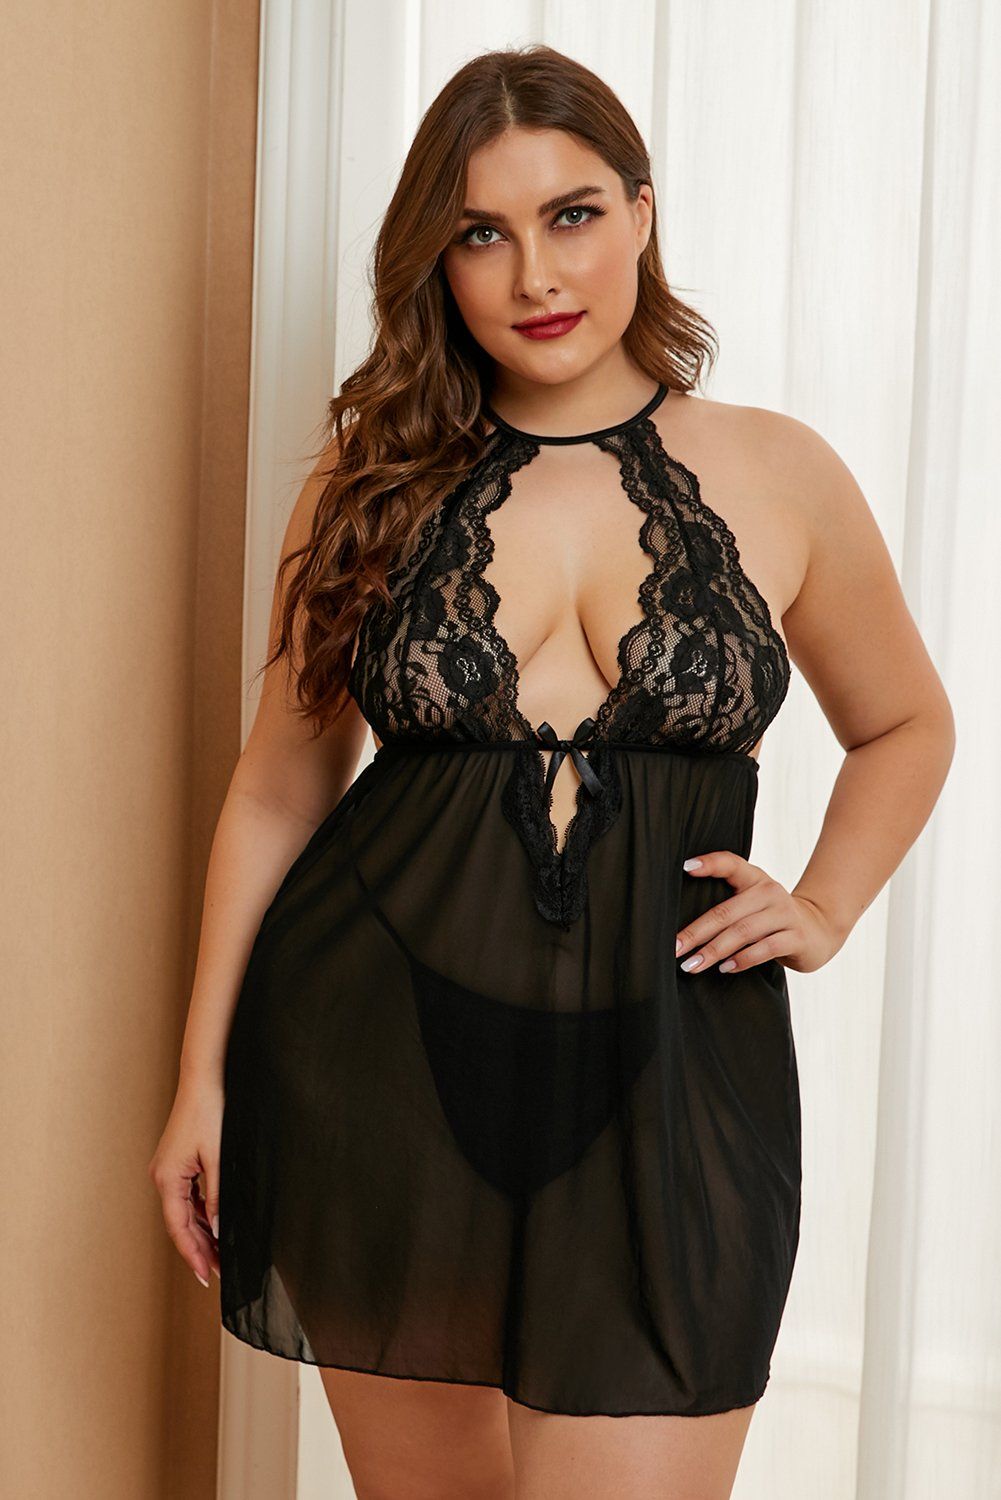 Featuring a sexy front and back cut out. Lace bust and hollow-out back. Ties at the back neck for a flexible adjust. Comes with a matching G-string included. Womens plus size lingerie in lace, satin and chiffon etc..